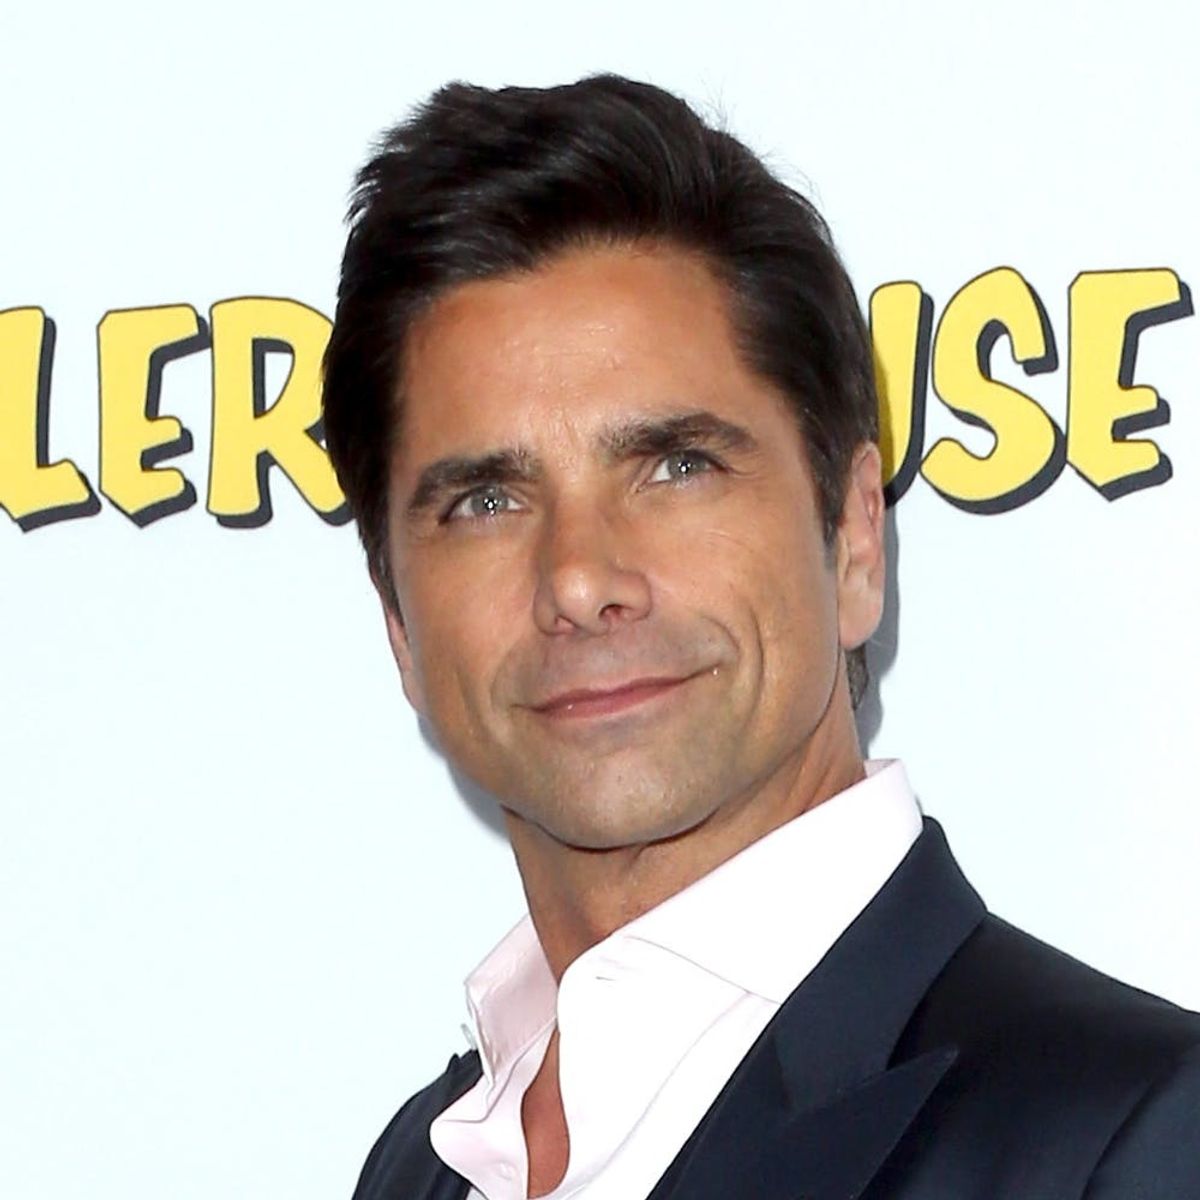 John Stamos Shares Adorable 1989 Video With Baby Olsen Twins